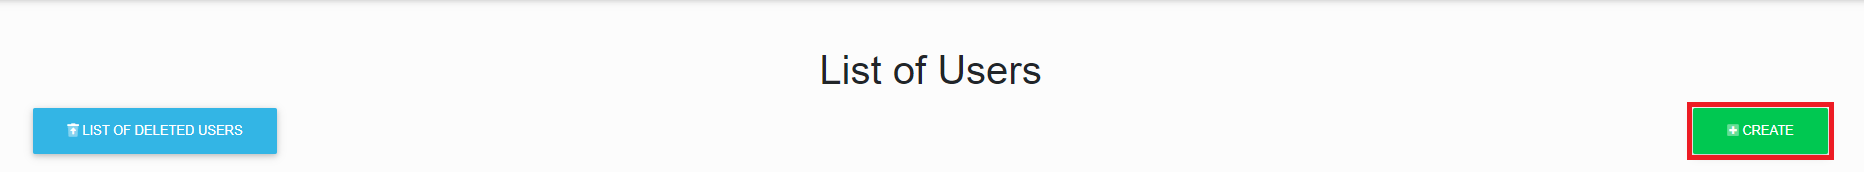 lists of users create.png